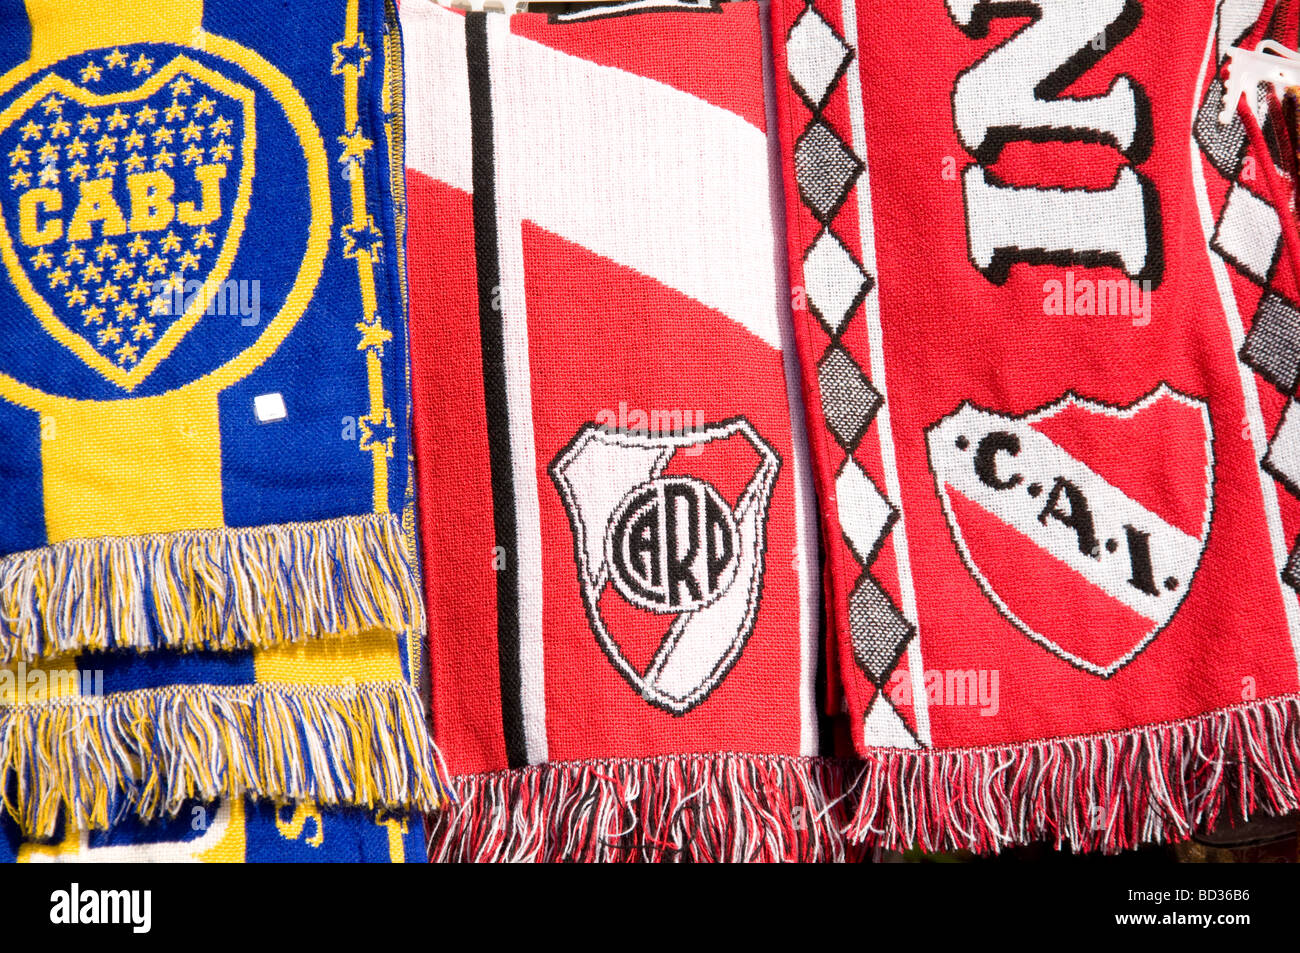 River Plate and Boca Juniors football scarves hanging in market stall in Tigre, Buenos Aires, Argentina Stock Photo